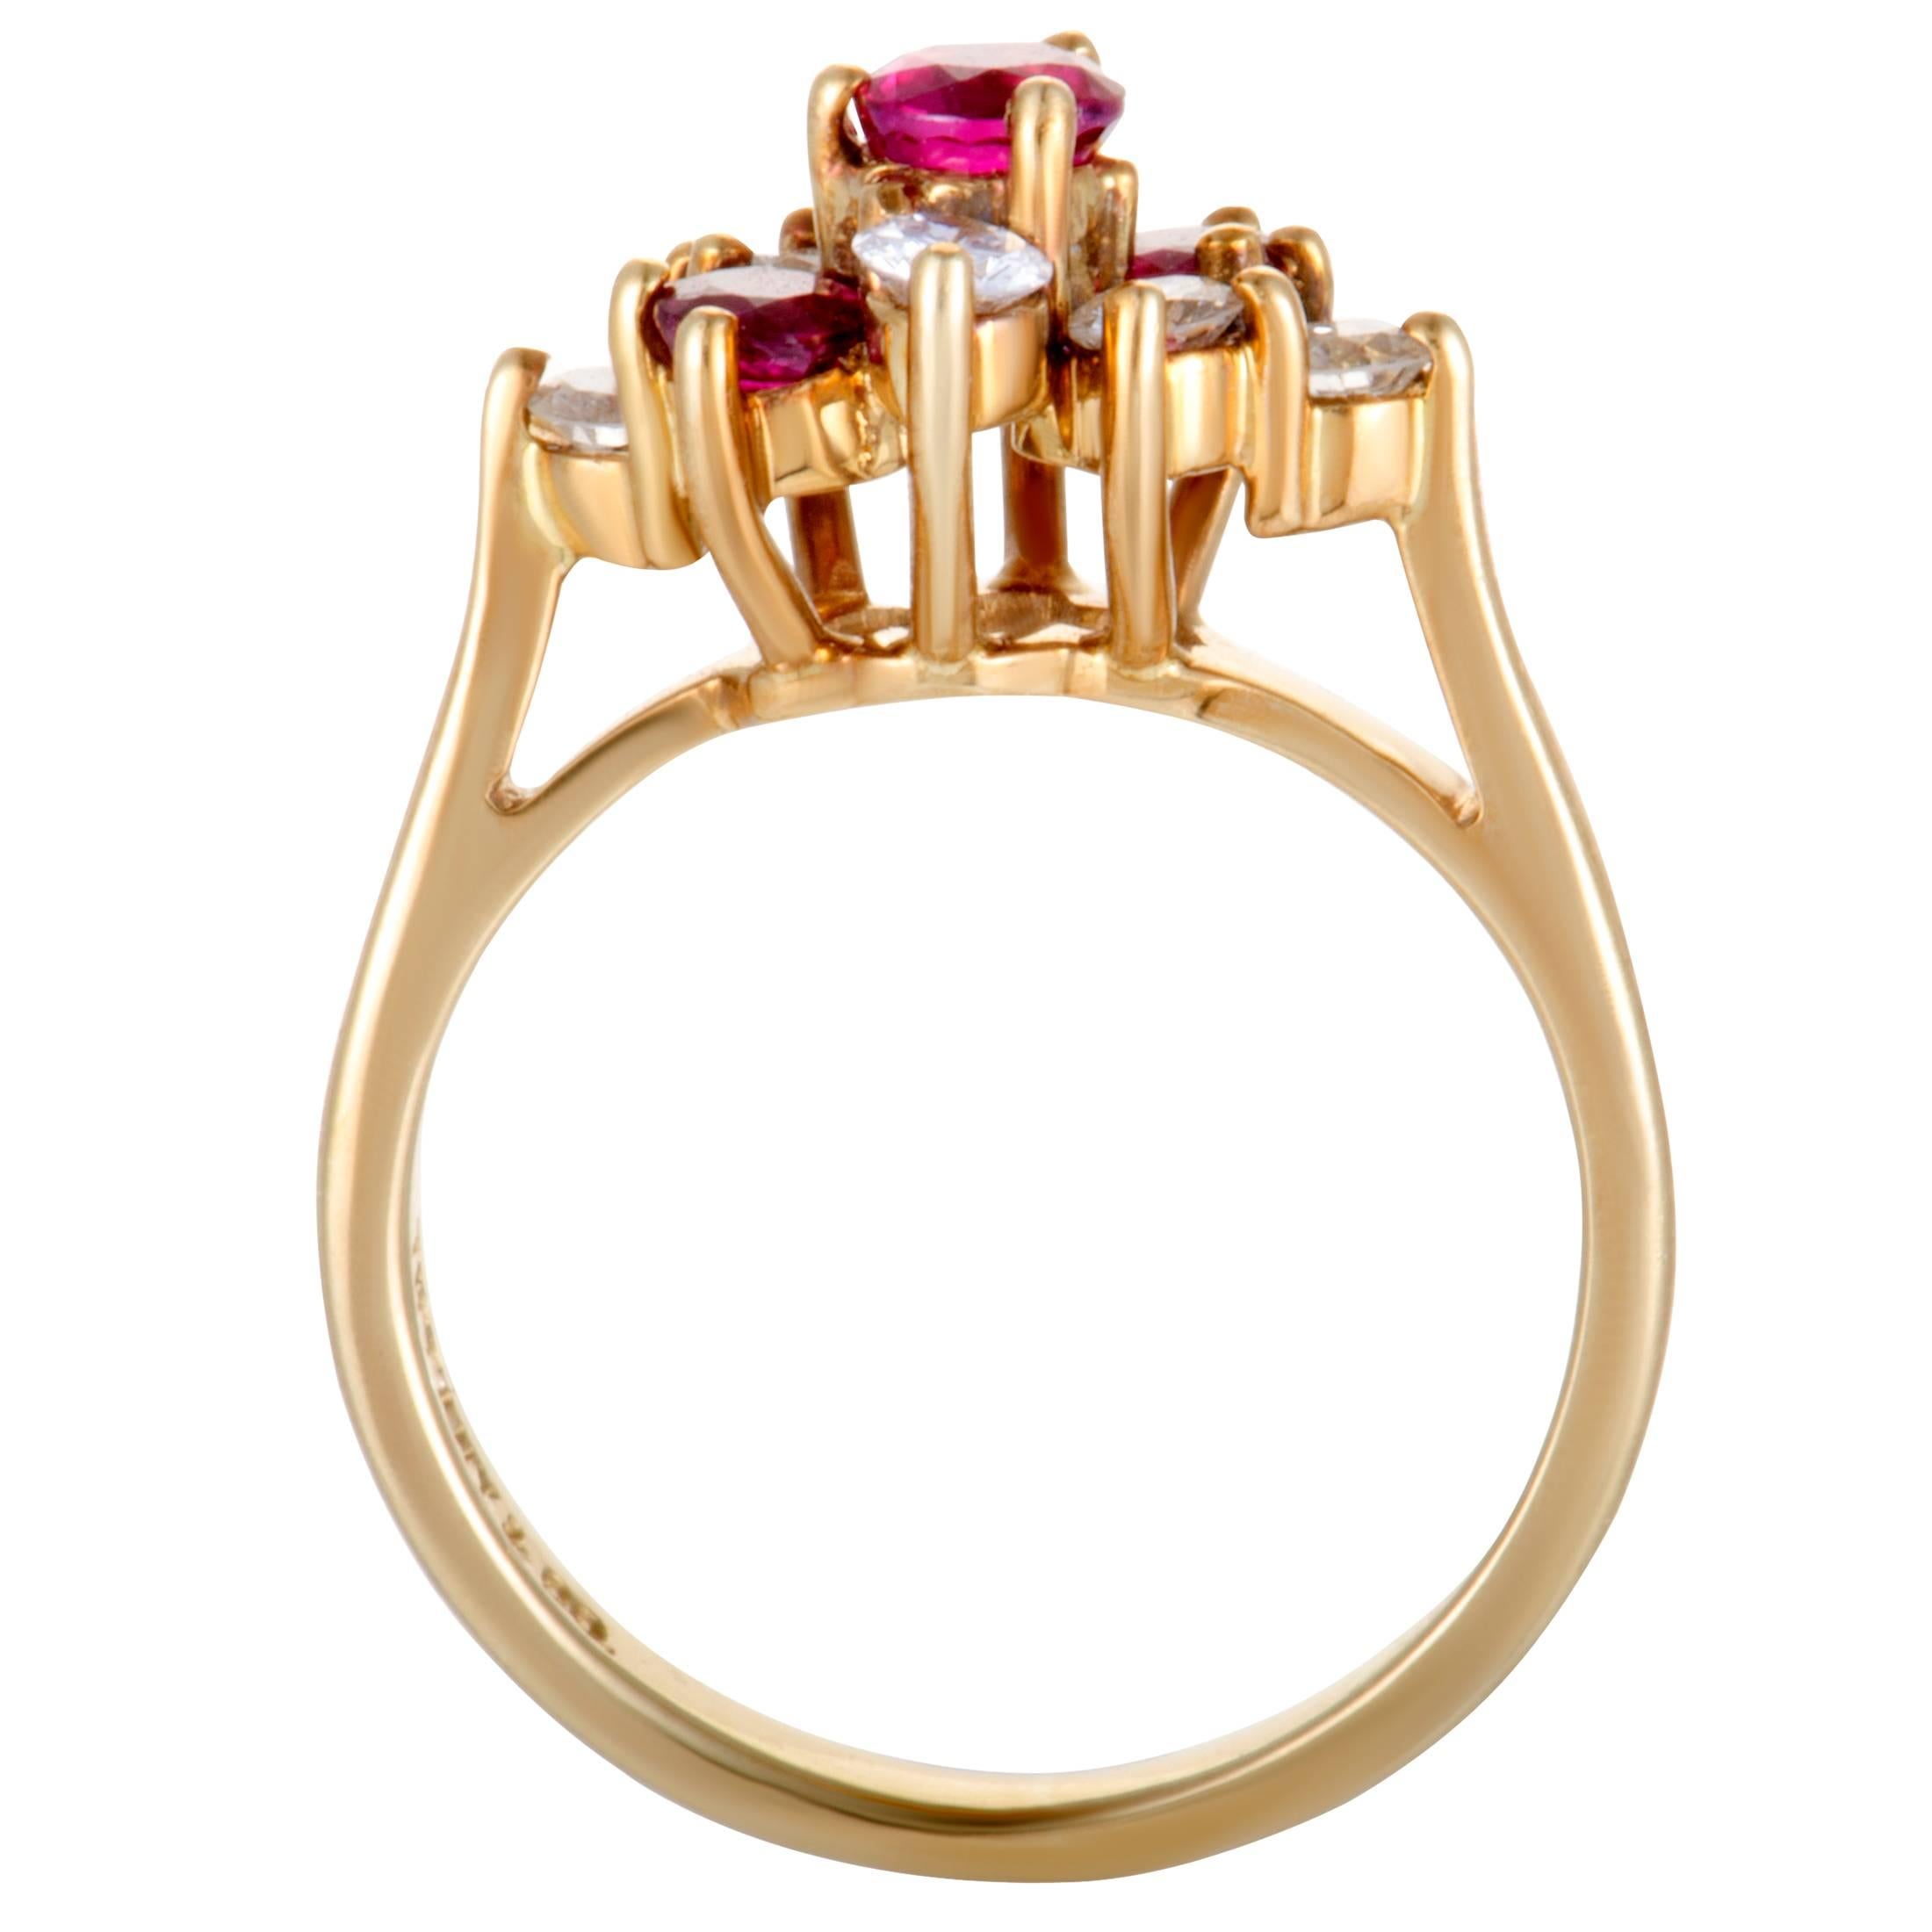 This elegant and classy ring is crafted in glistening 18K yellow gold by Tiffany & Co. This stunning ring displays a mesmerizing and captivating appeal with its spectacular embellishment of gorgeous red rubies, weighing 0.25ct, surrounded by 0.30ct